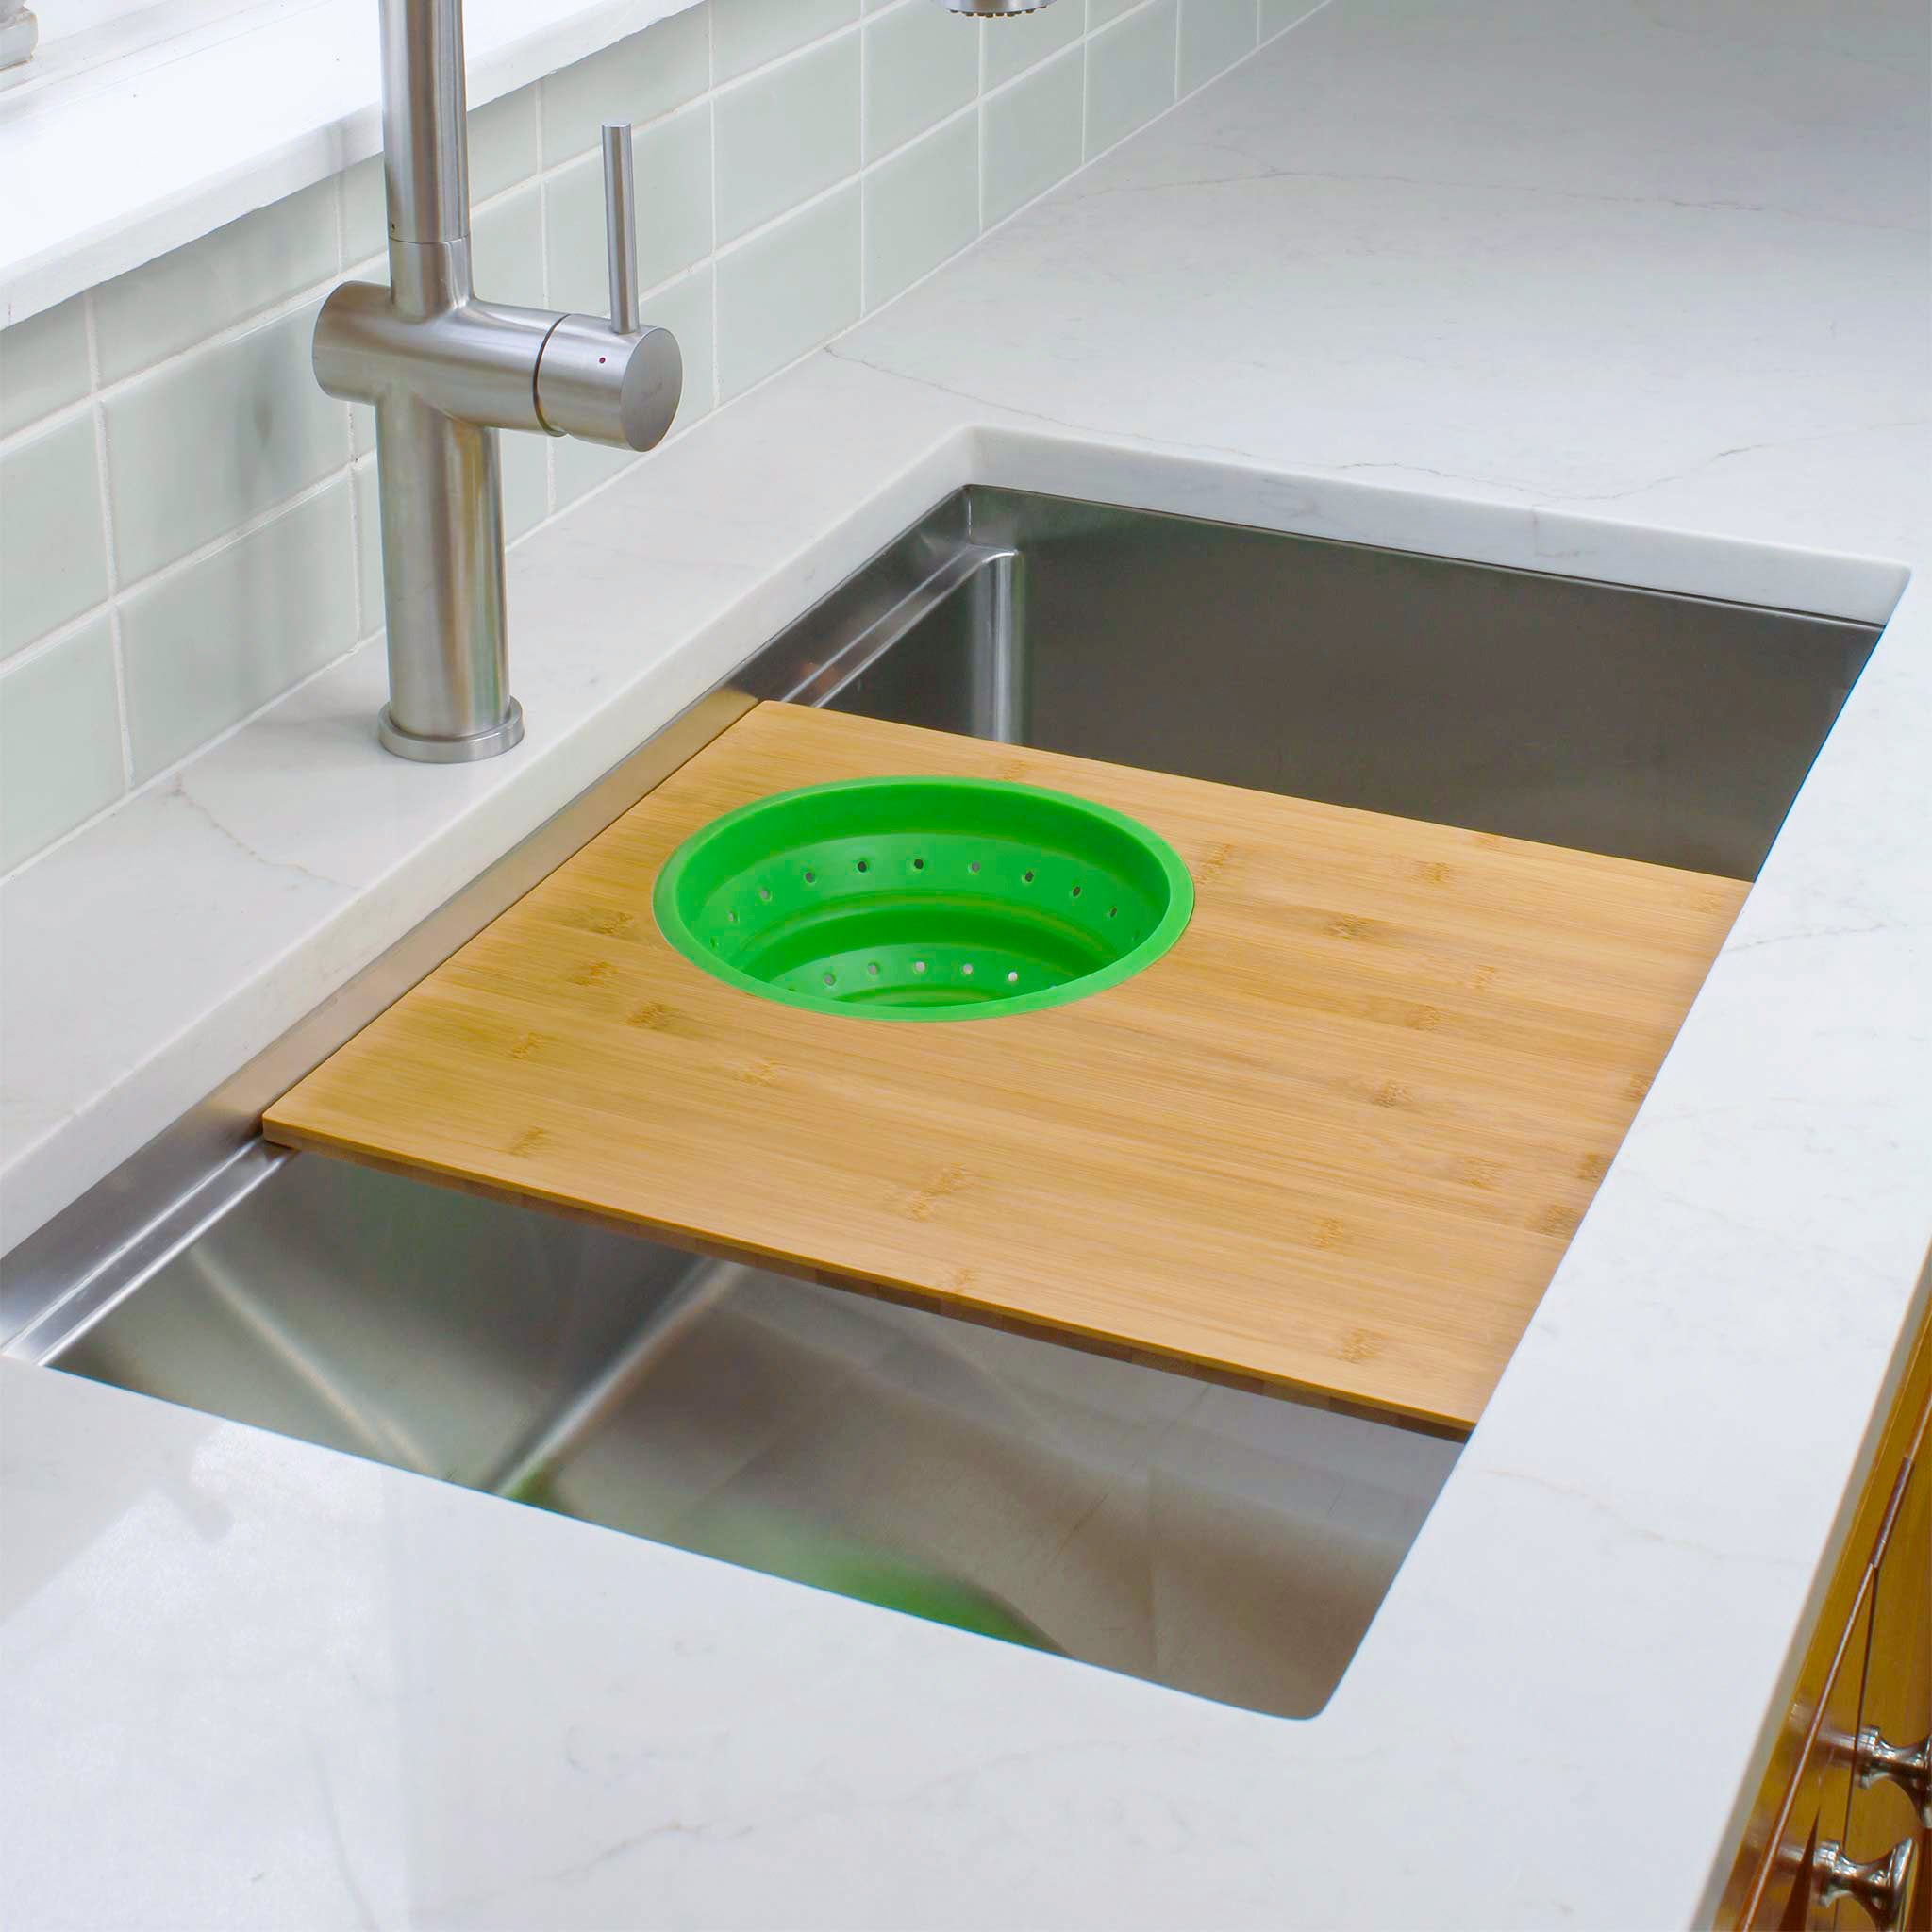 Seamless drain workstation sink with cutting board and silicone colander in fresh green from Create Good Sinks